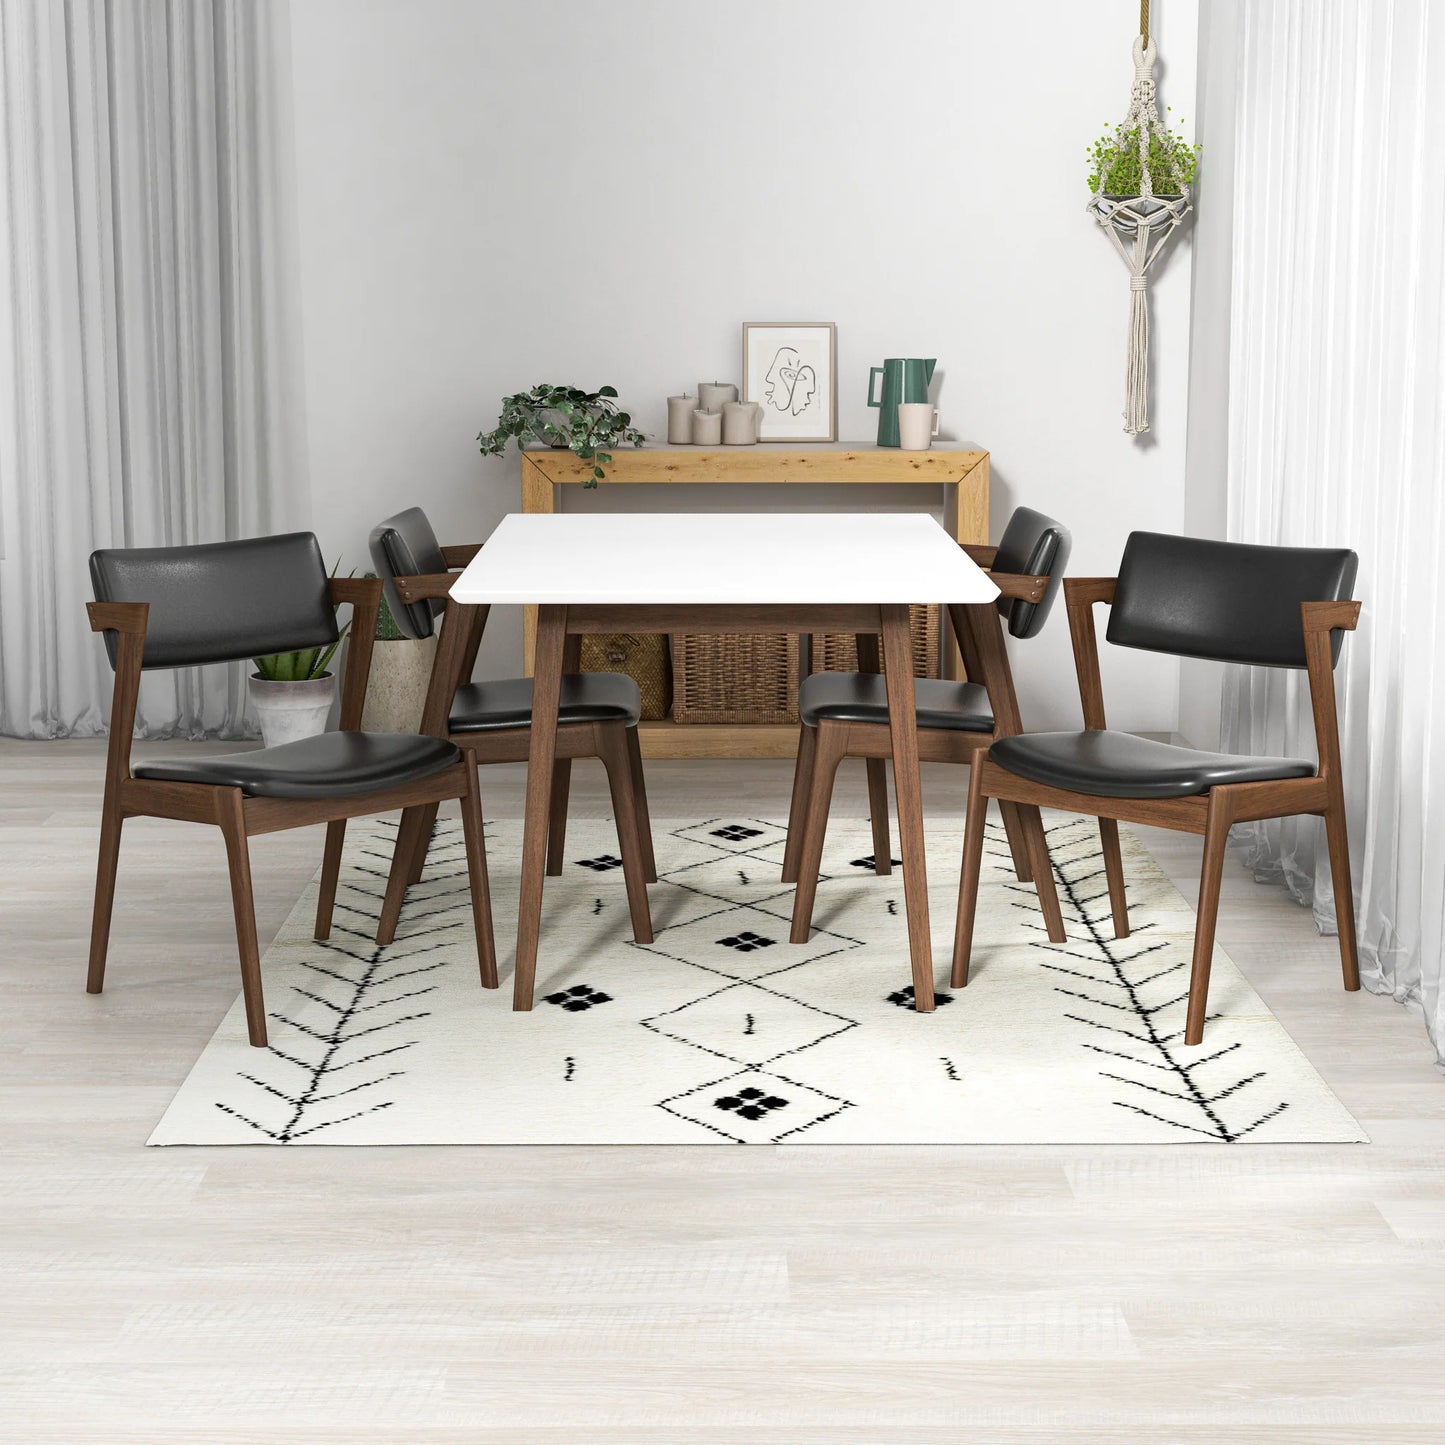 Adira (Small - White) Dining Set with 4 Ricco (Black Leather) Dining Chairs